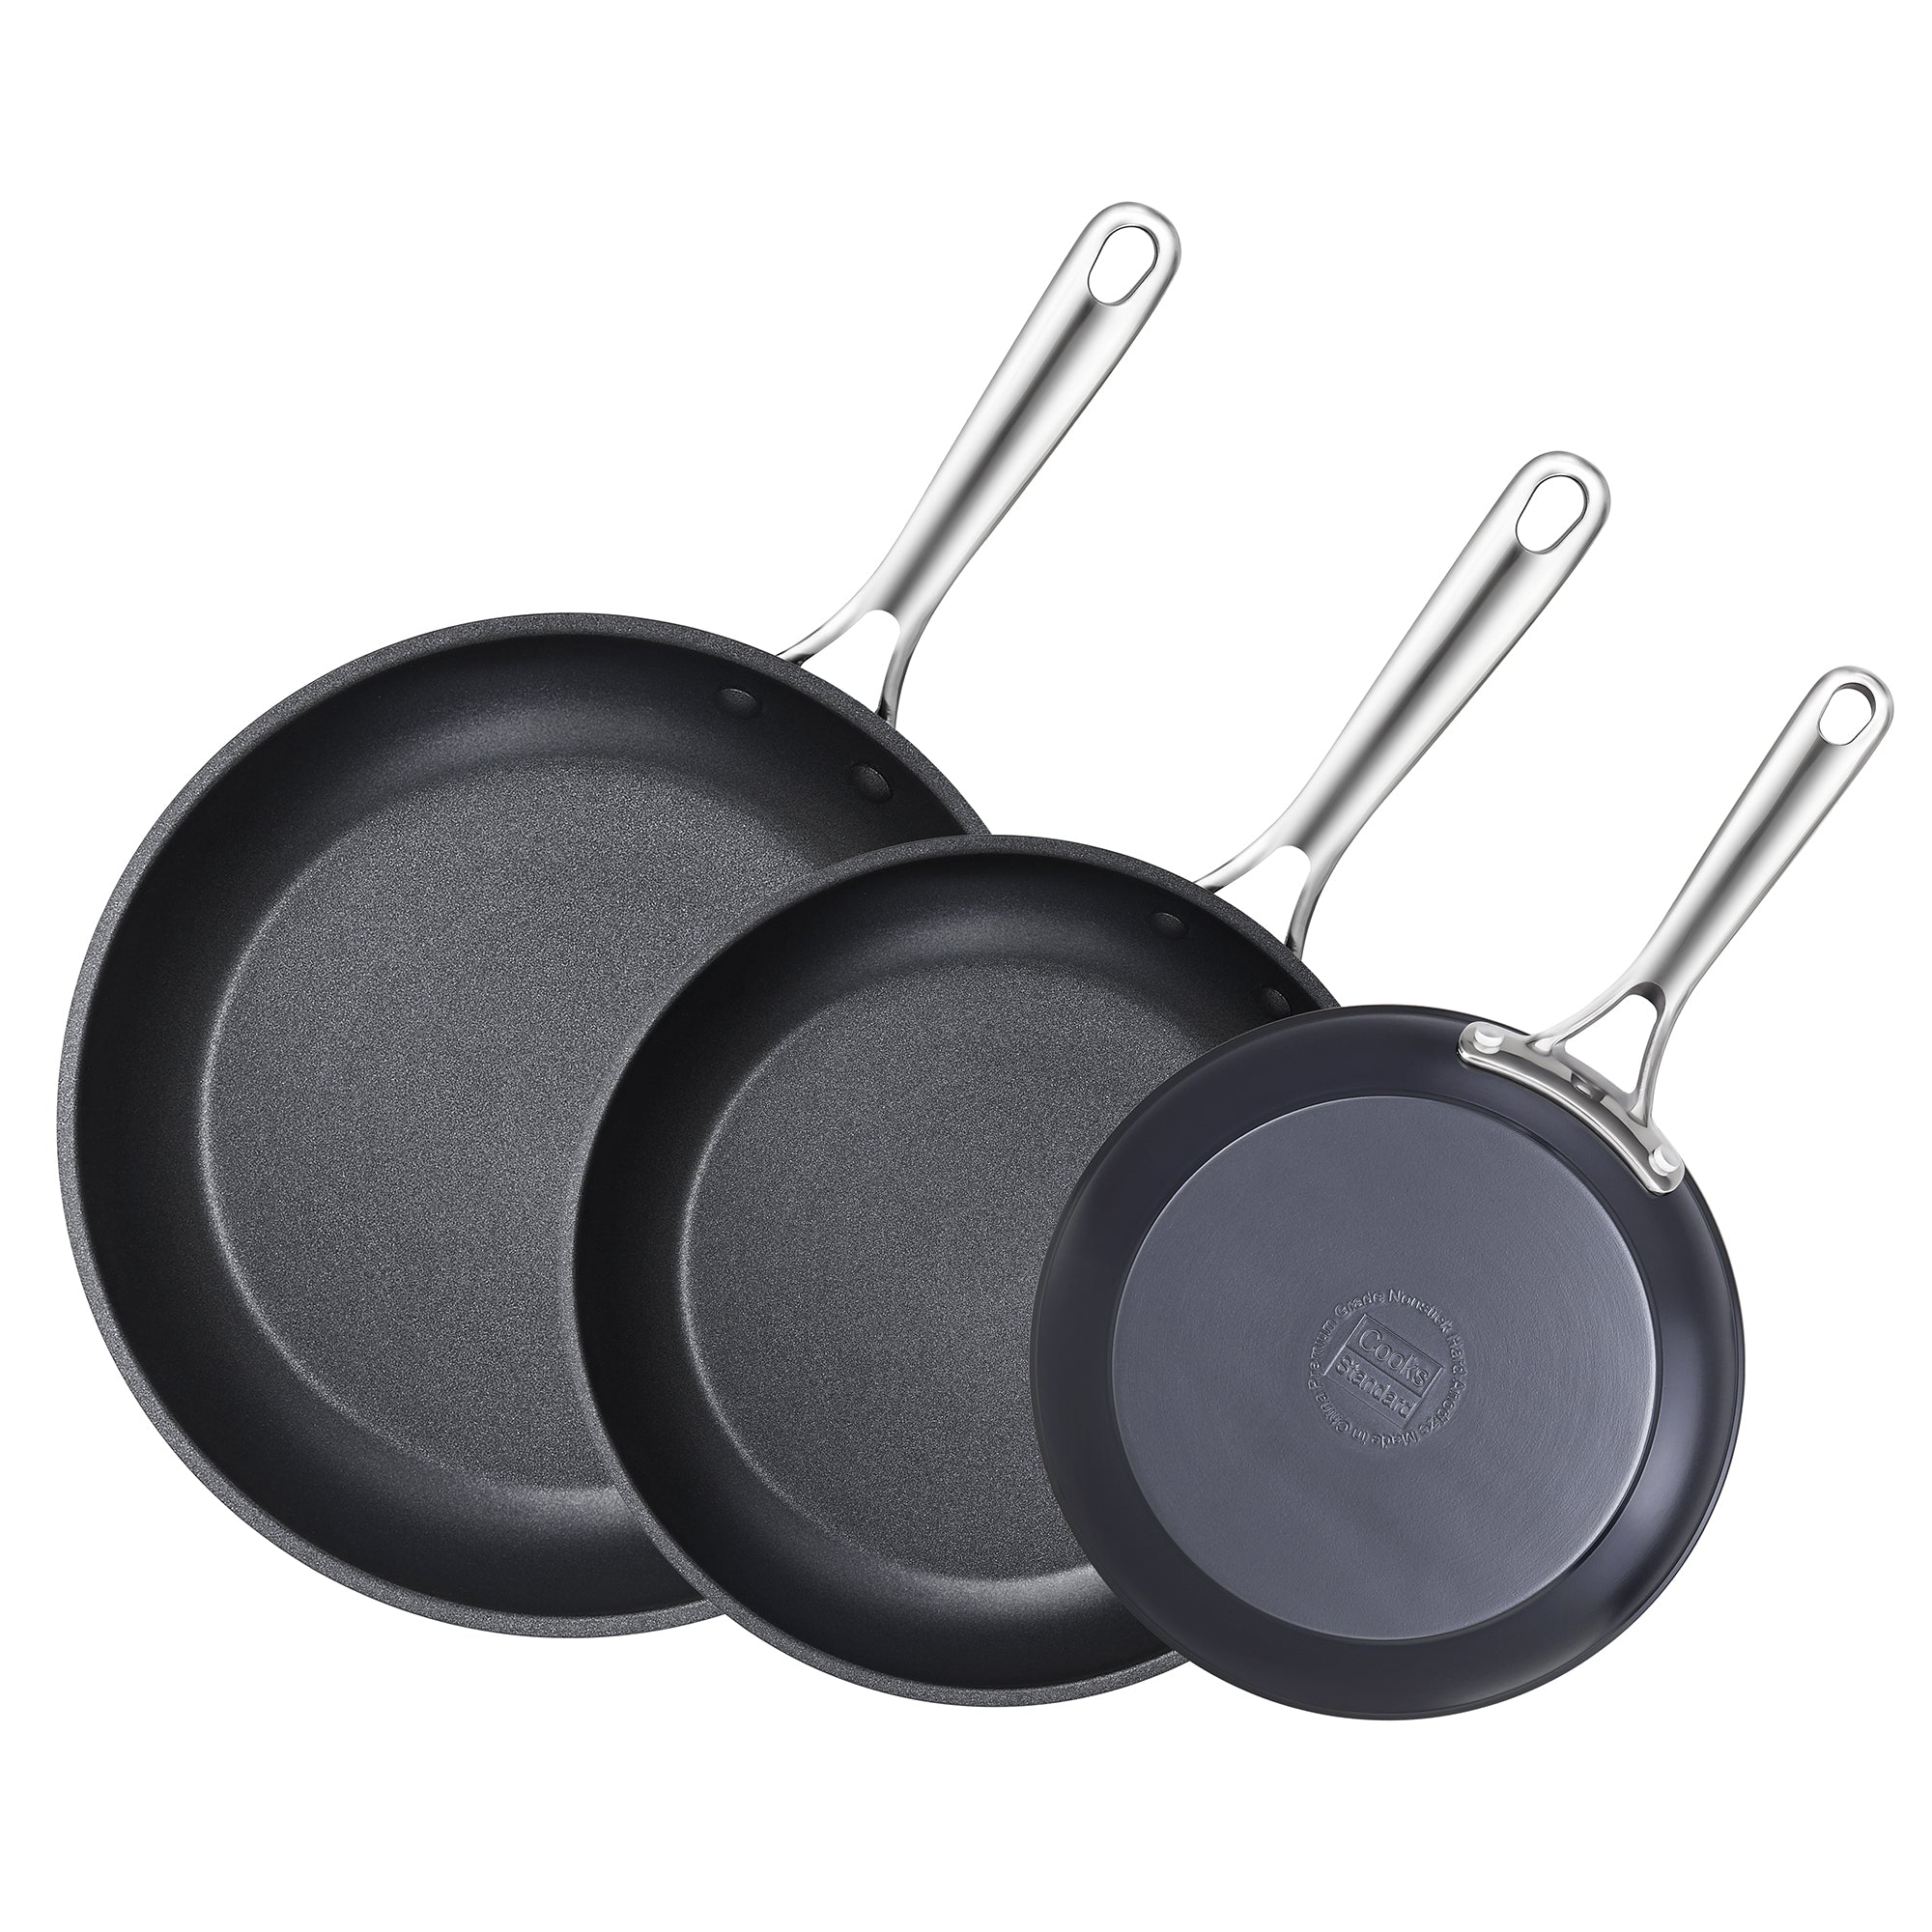 Cooks Standard Classic Hard Anodized Nonstick 8 inch/10.5 inch/12 inch 3-Piece Fry /Saute / Omelet Pan Set